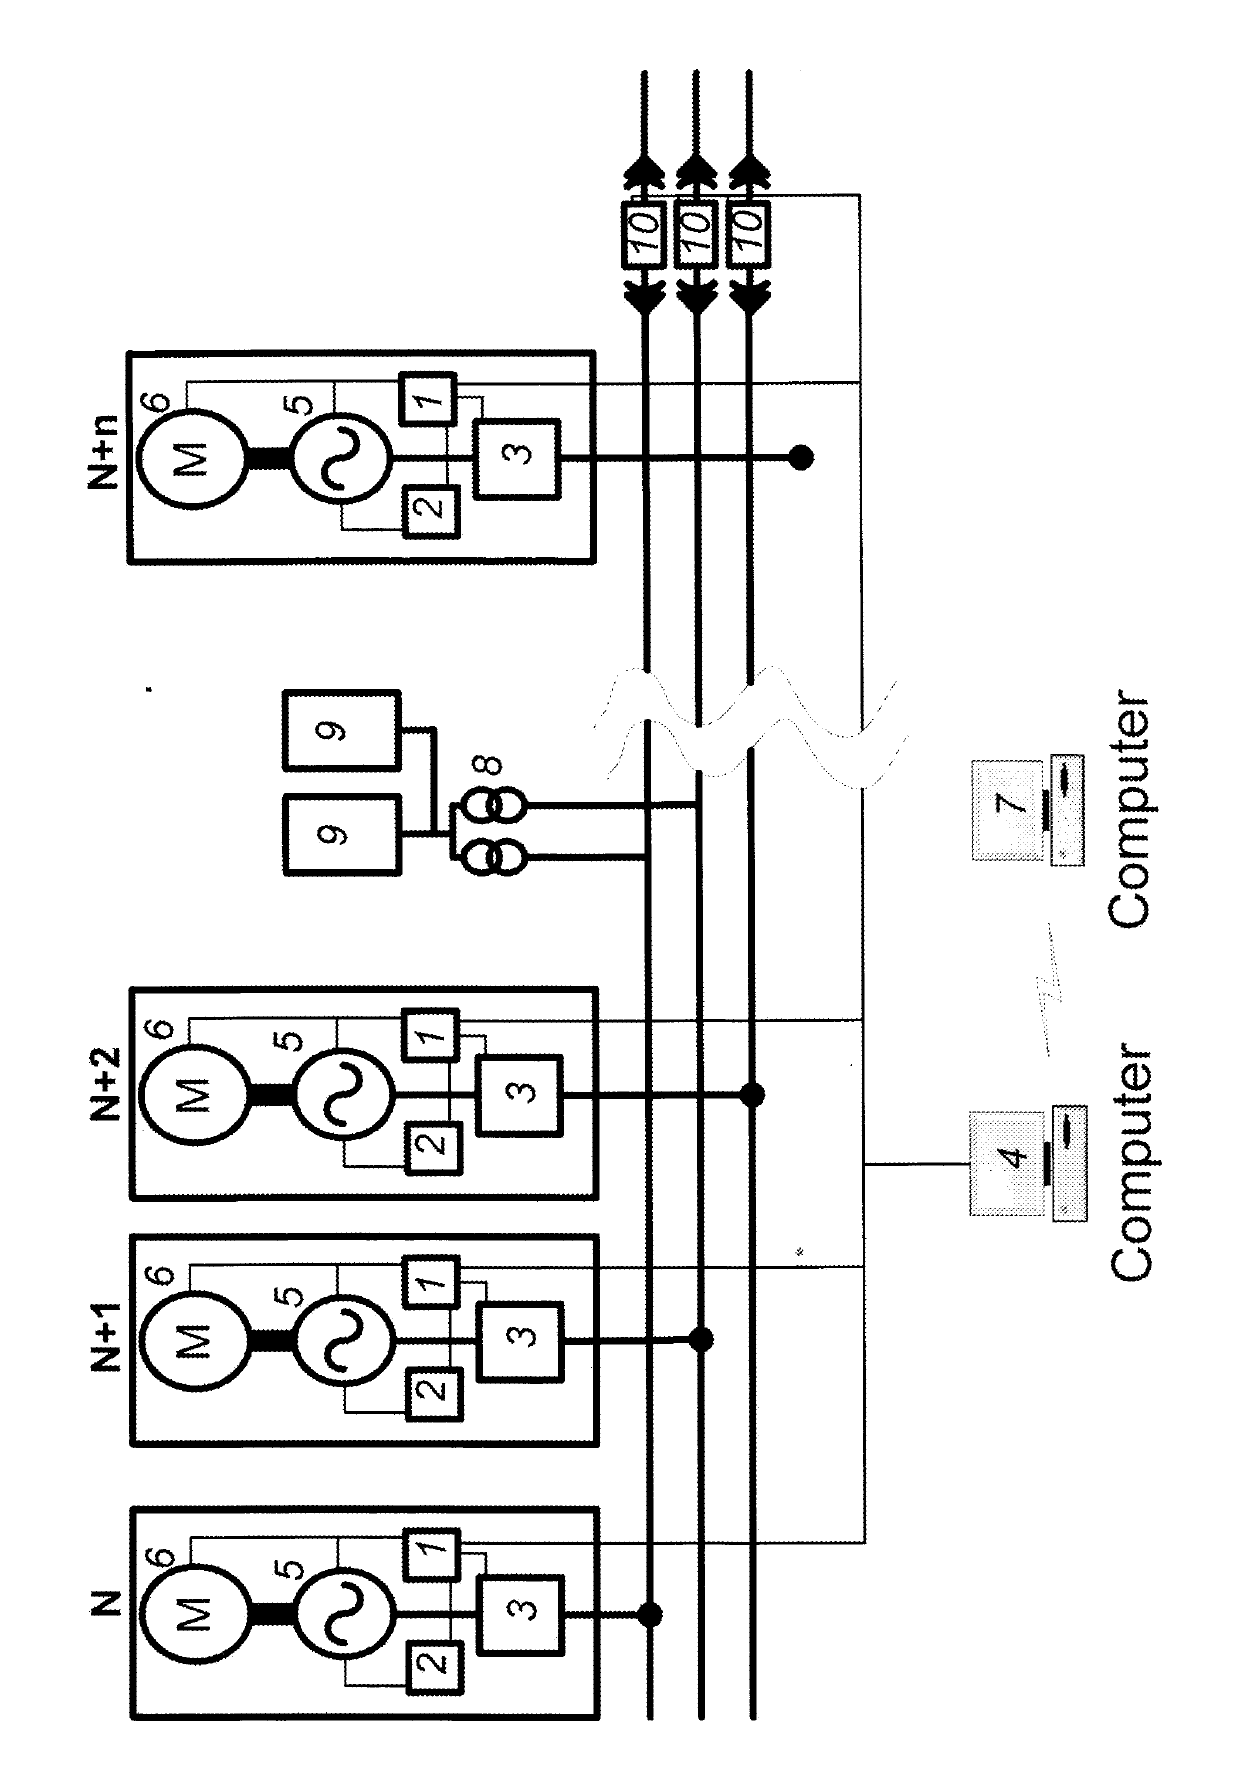 System for controlling electrical power generation